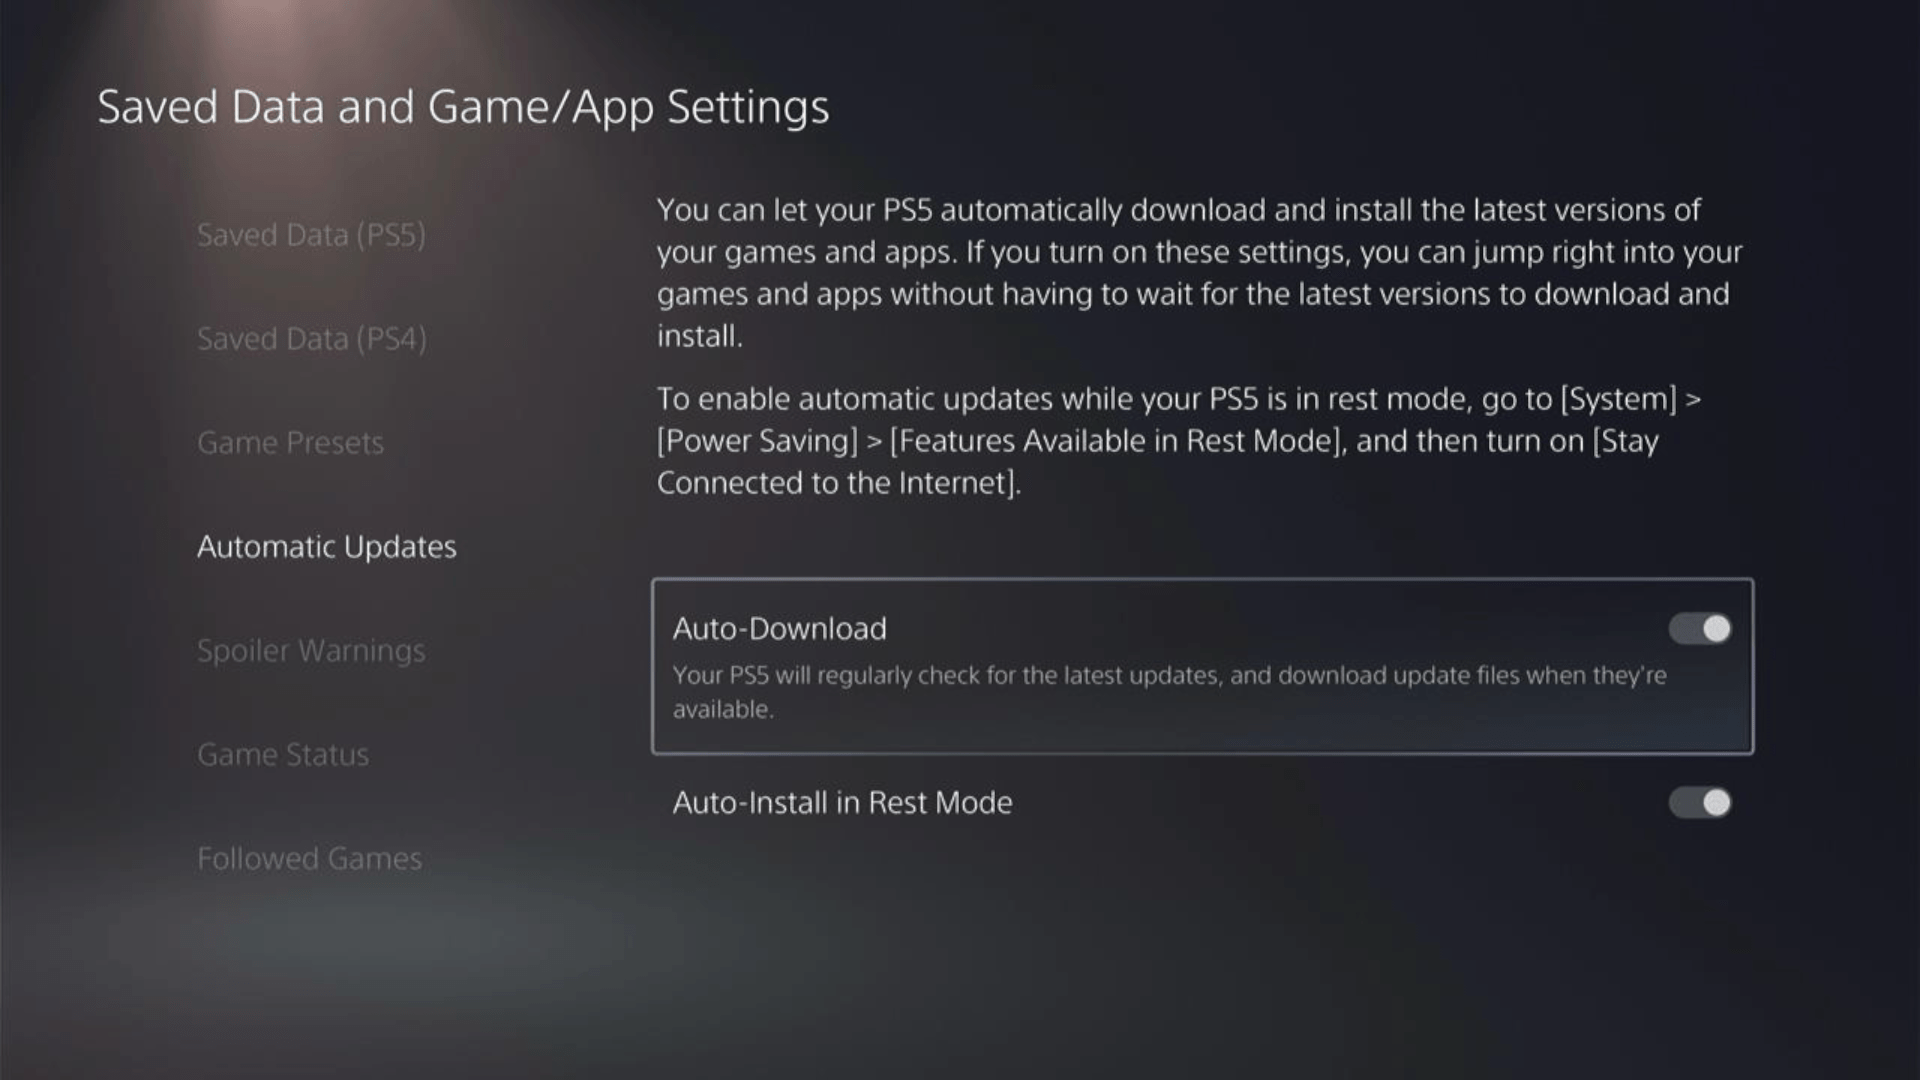 In the Saved Data and Game/App Settings window, select Automatic Updates from the left sidebar to enable automatic game updates to avoid not loading